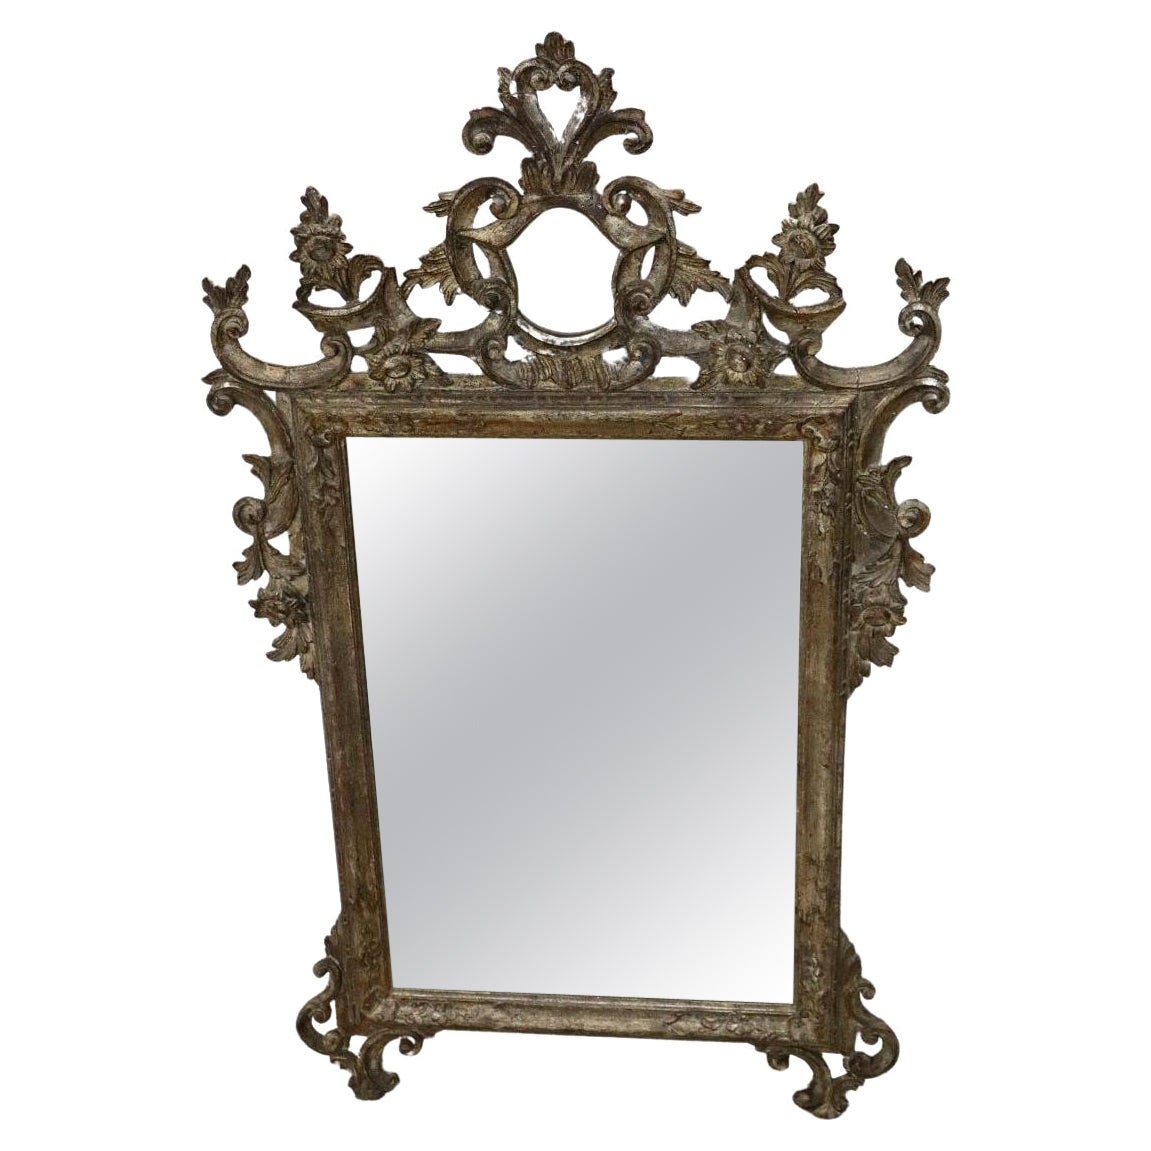 Early 20th Century Italian Louis XV Style Carved and Silvered Wood Wall Mirror For Sale